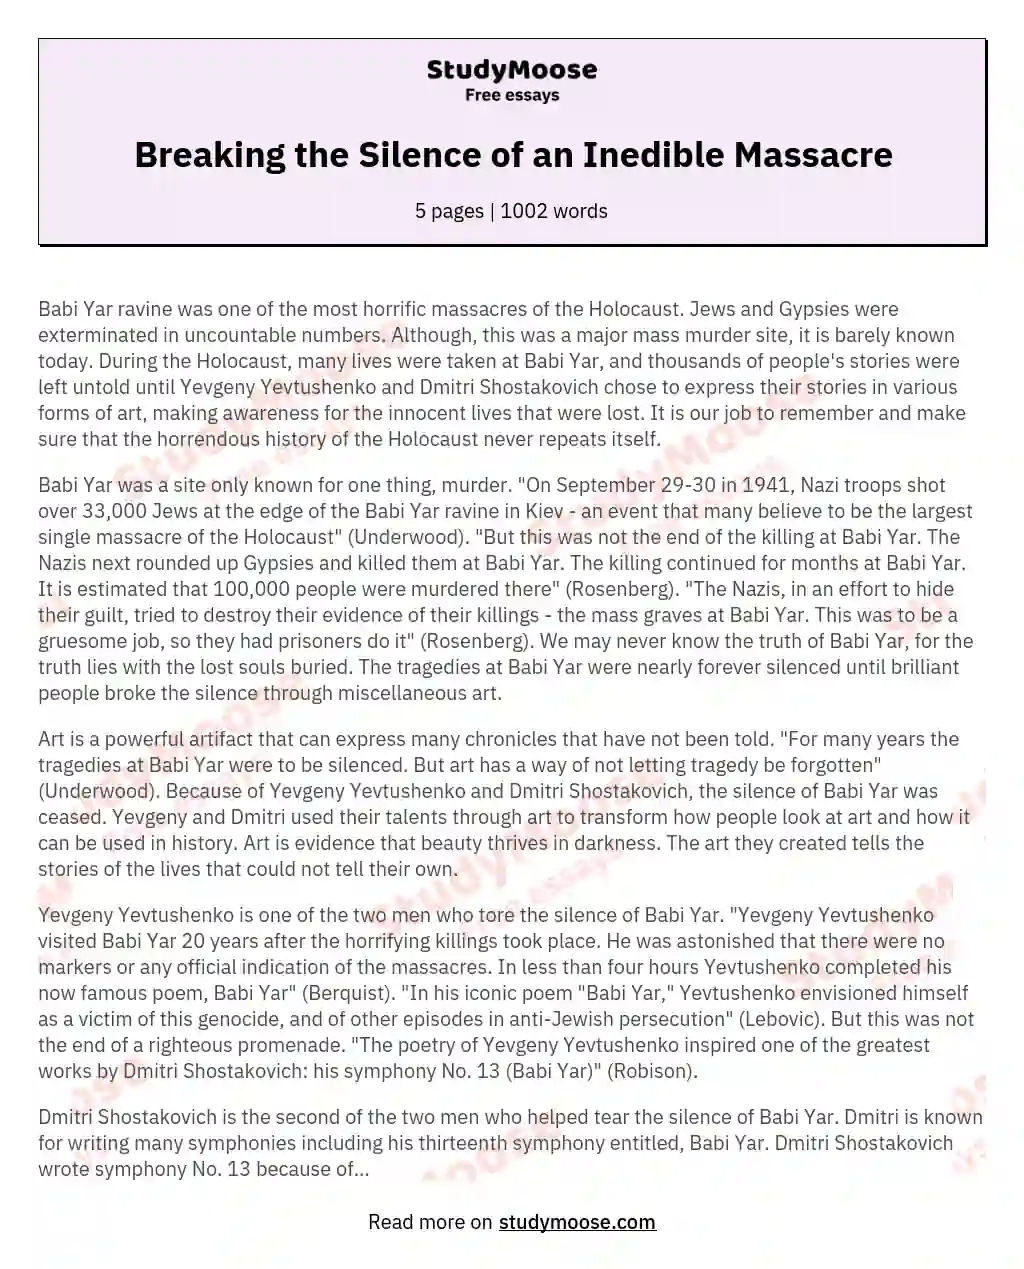 Breaking the Silence of an Inedible Massacre essay